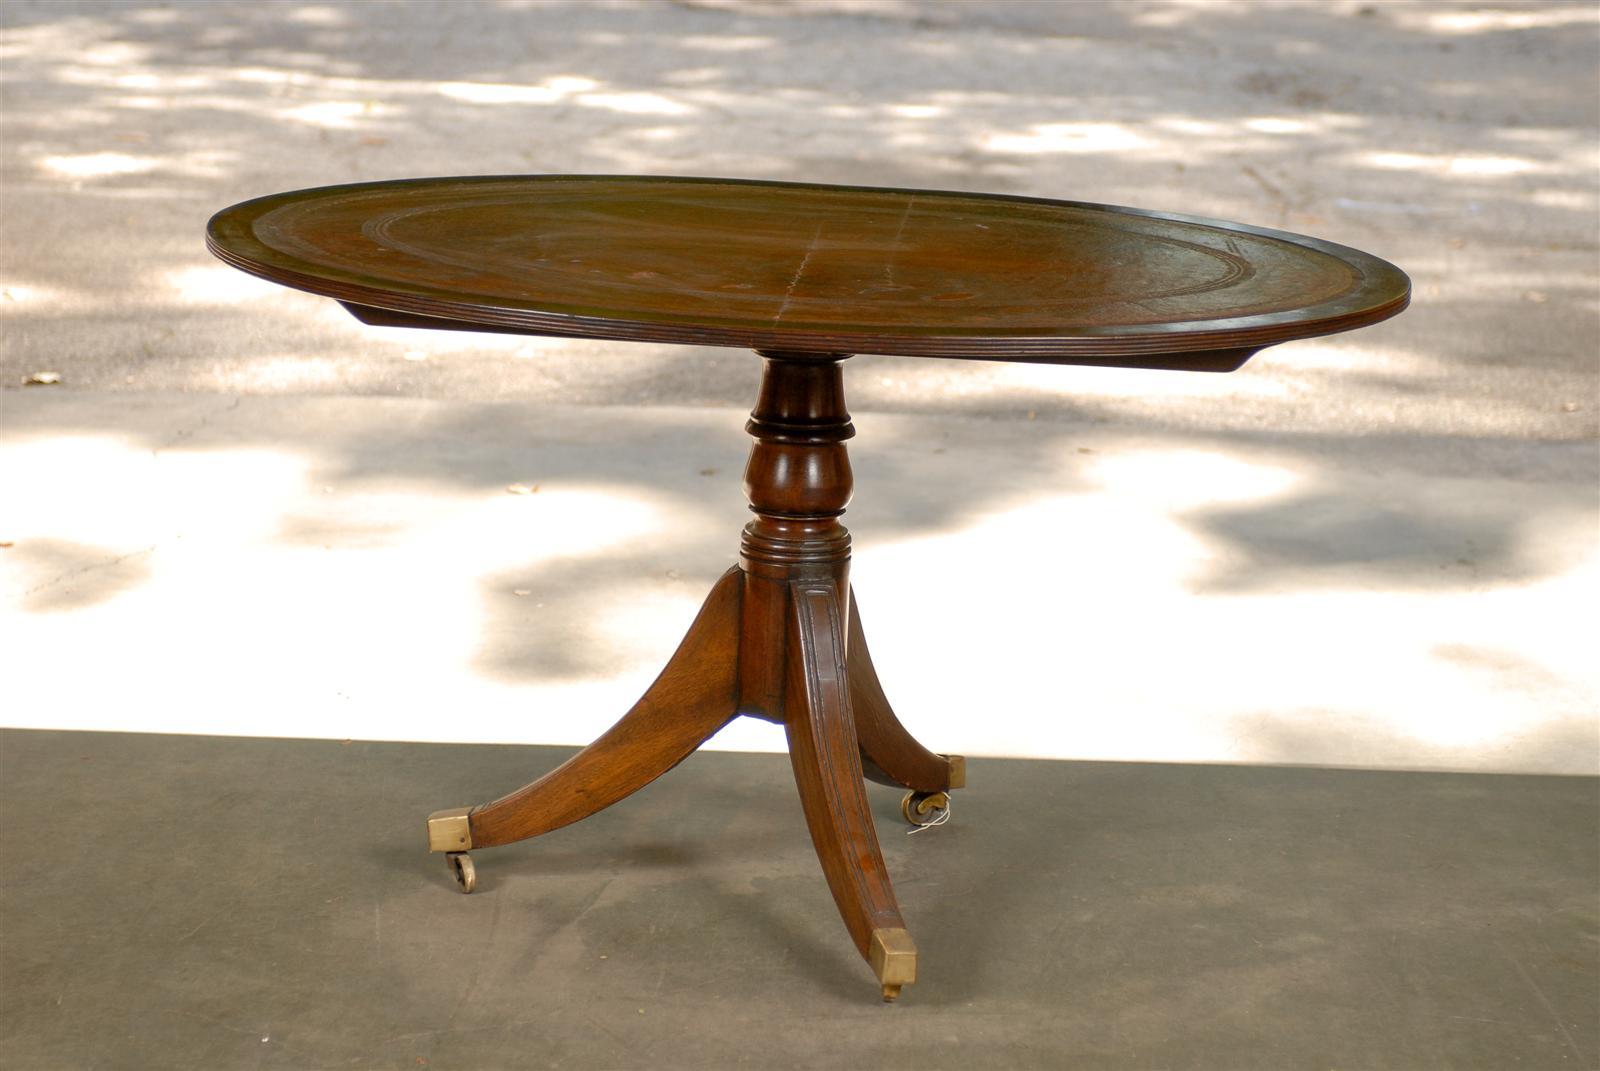 19th century English oval breakfast table with red leather top
Top tilts.